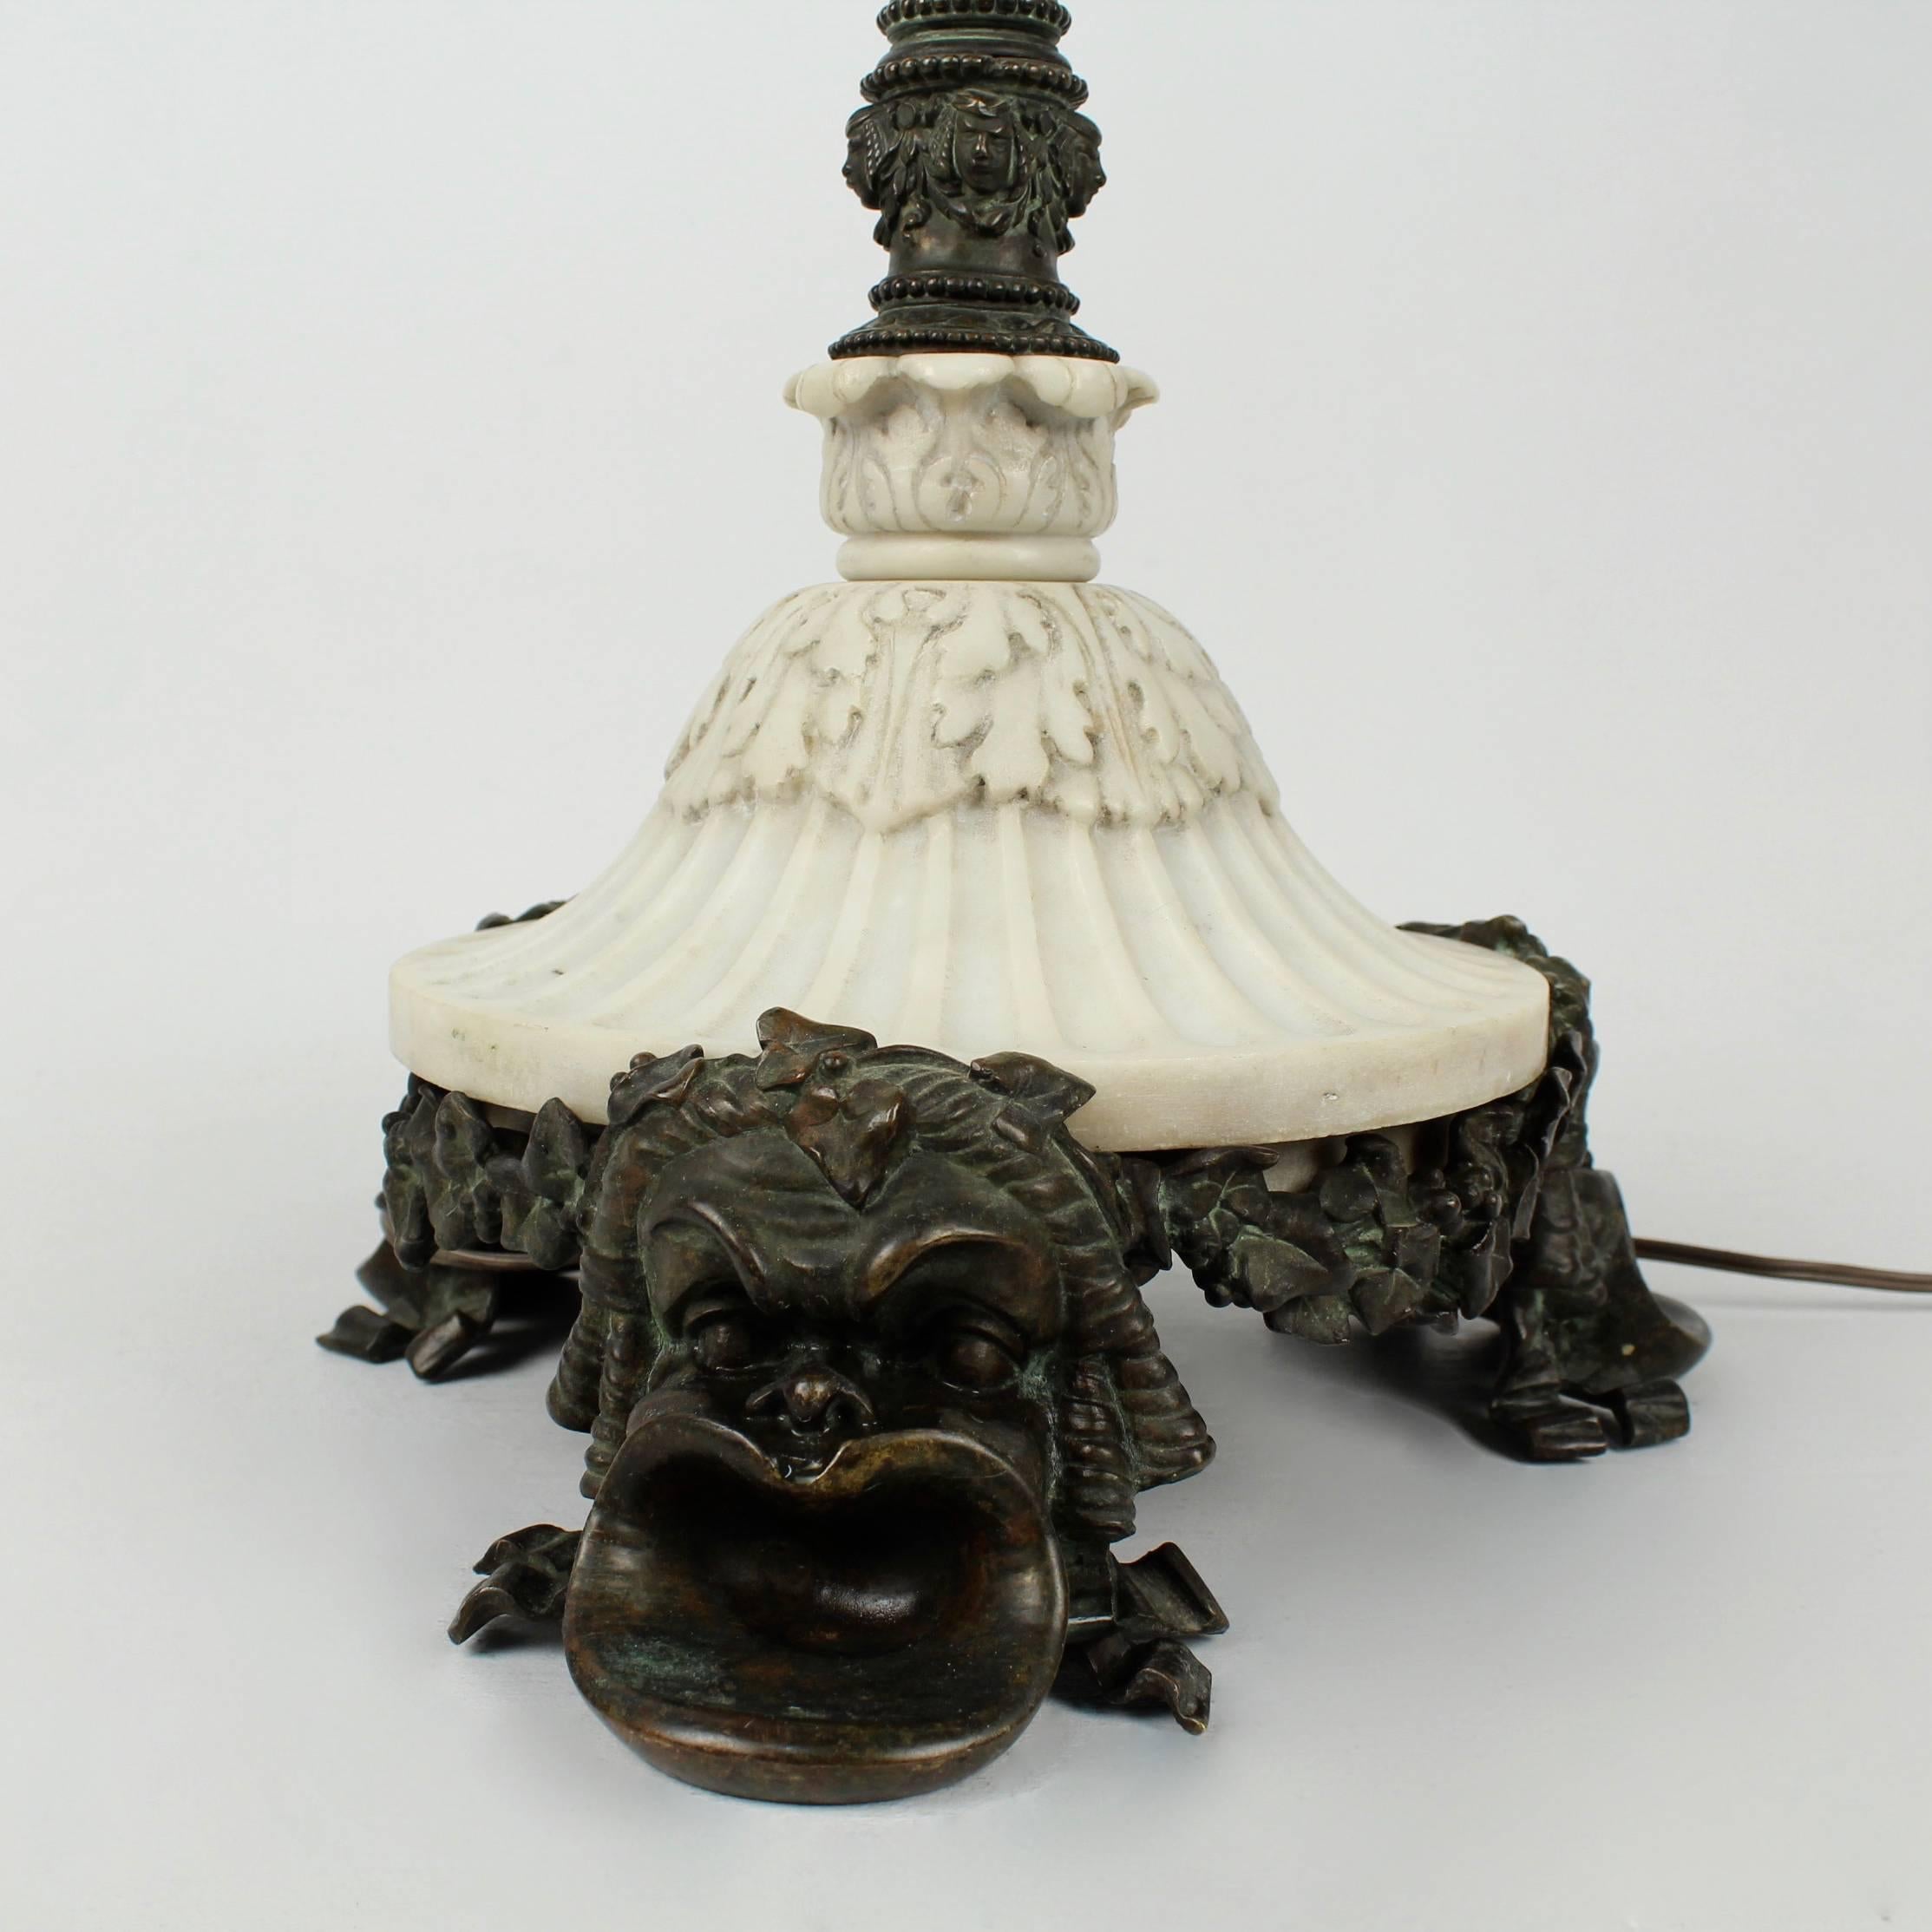 An antique E. F. Caldwell bronze and marble table lamp of exceptional quality. 

Feet modeled as Greek masks support a round carved, fluted white marble base and a cast bronze central pedestal for the lamp. 

The lamp was likely originally